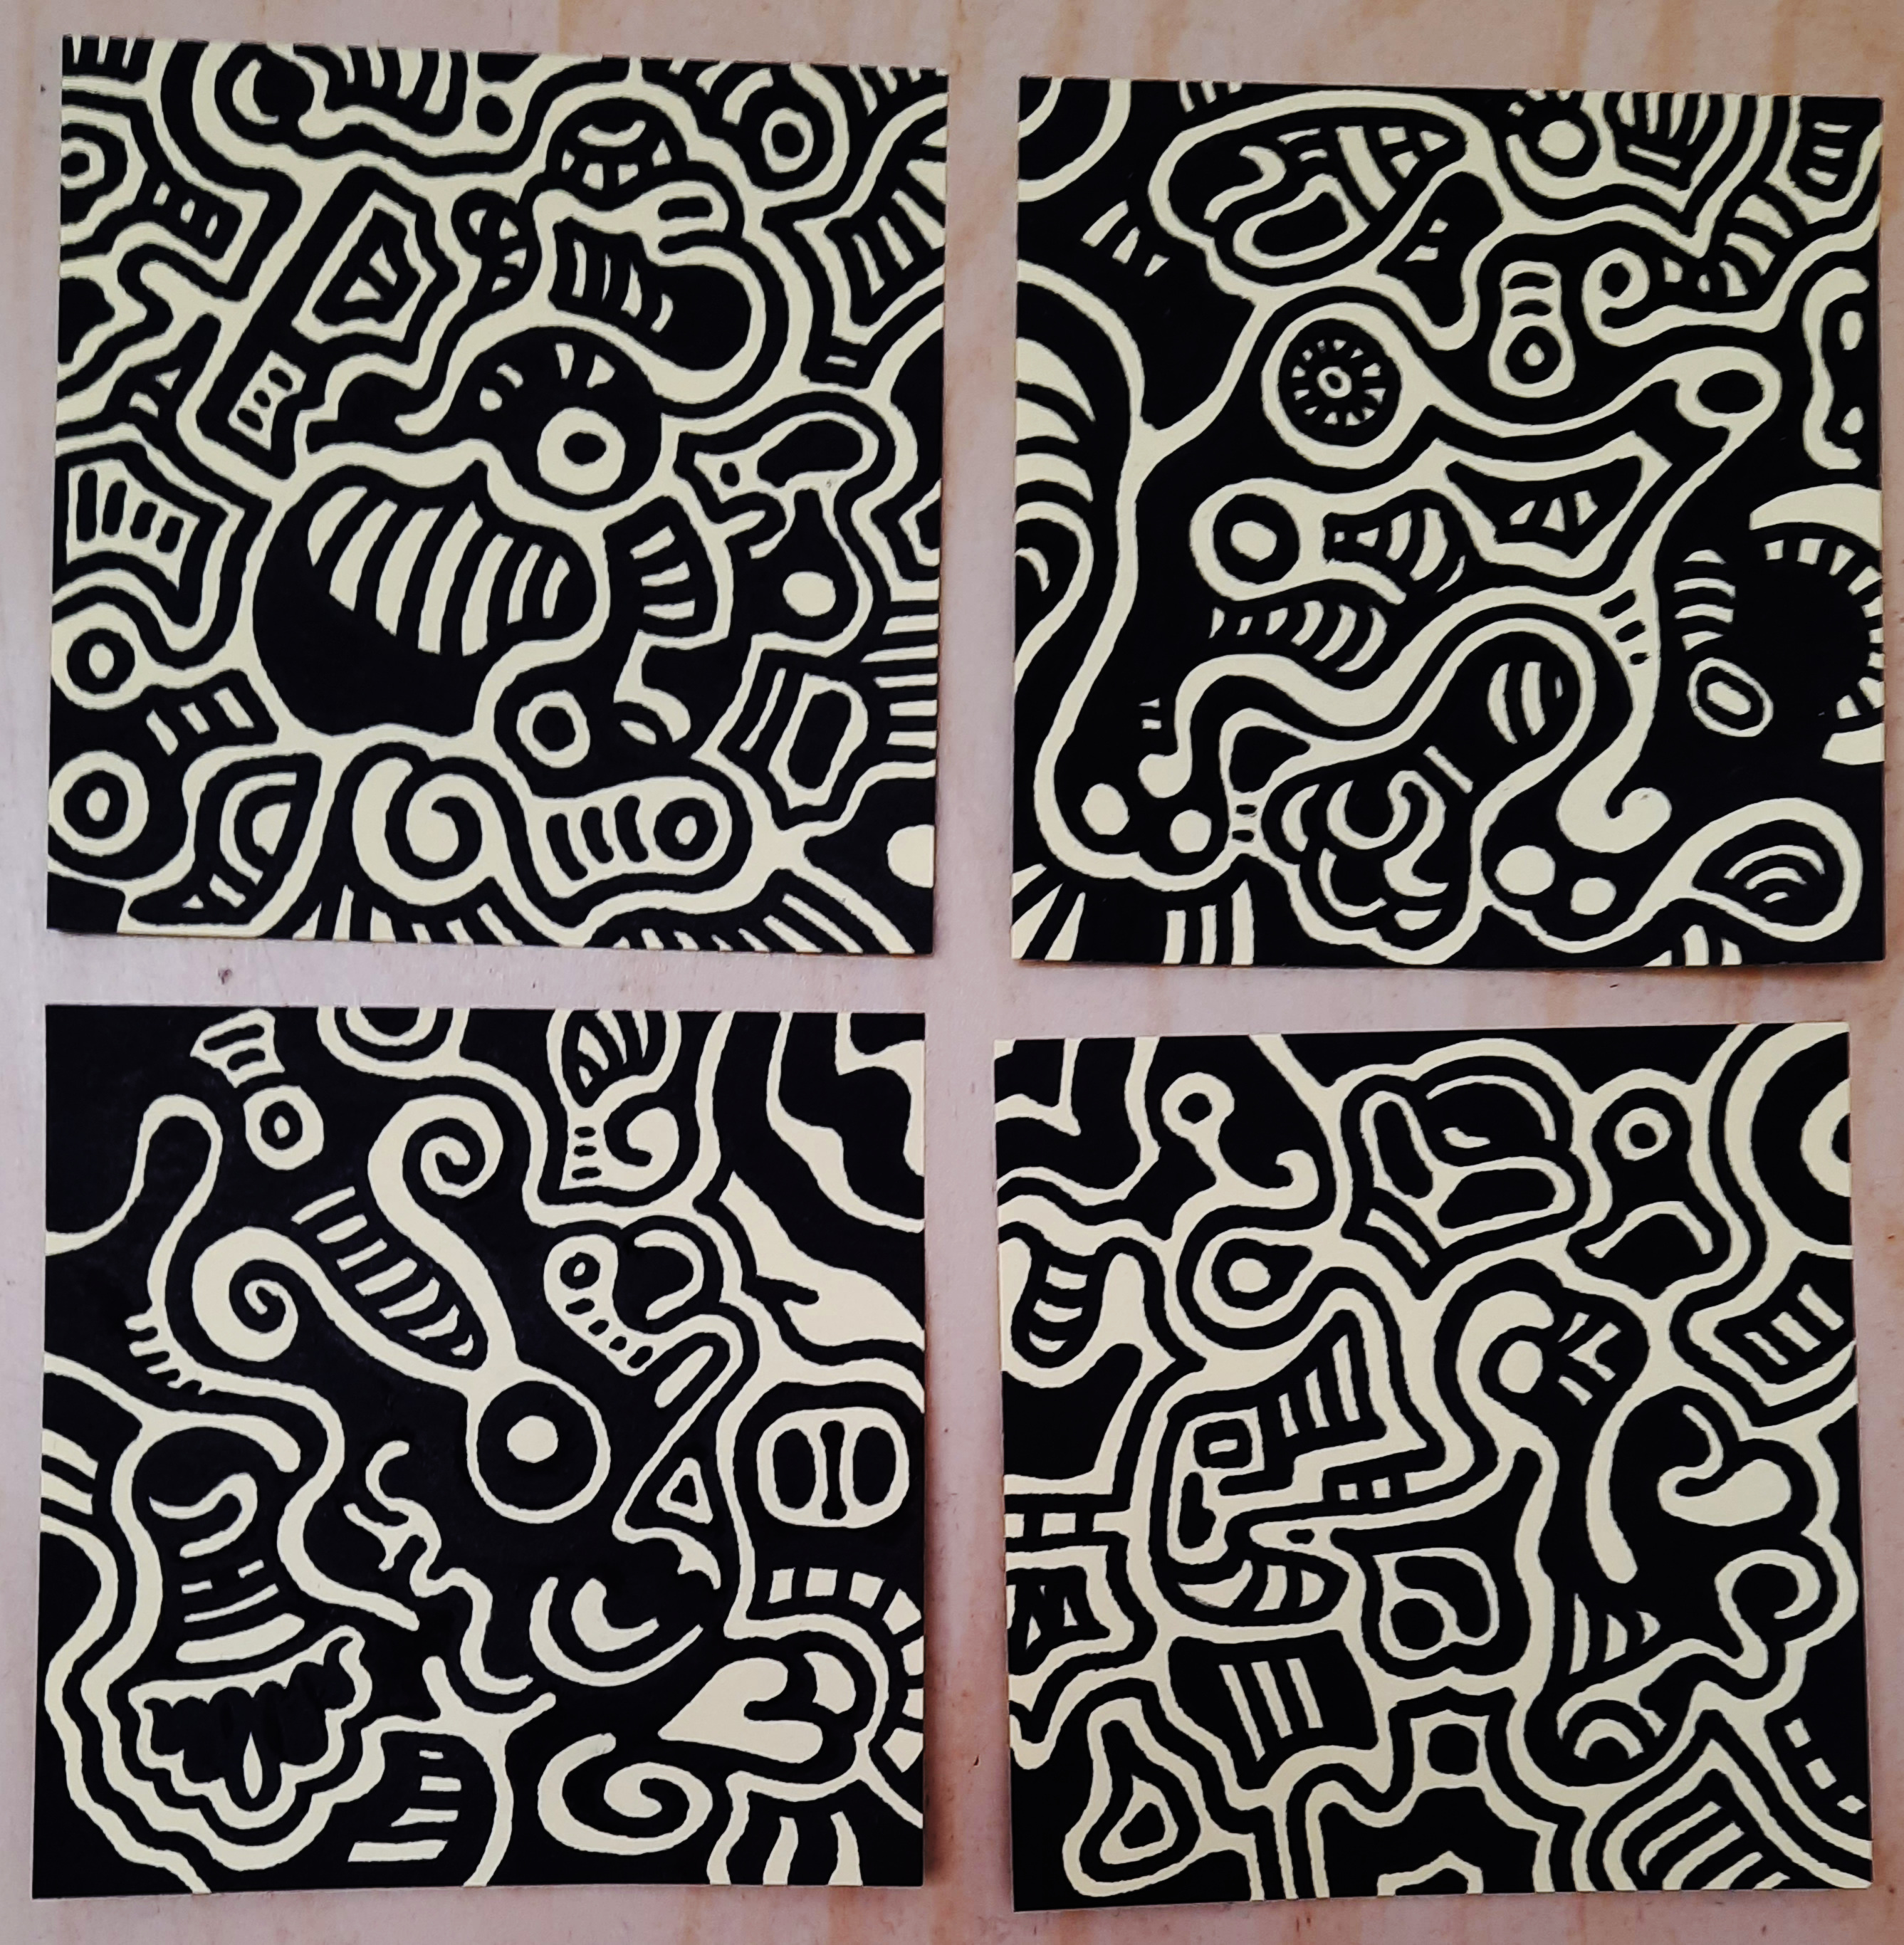 4 post it notes covered in swirly doodles